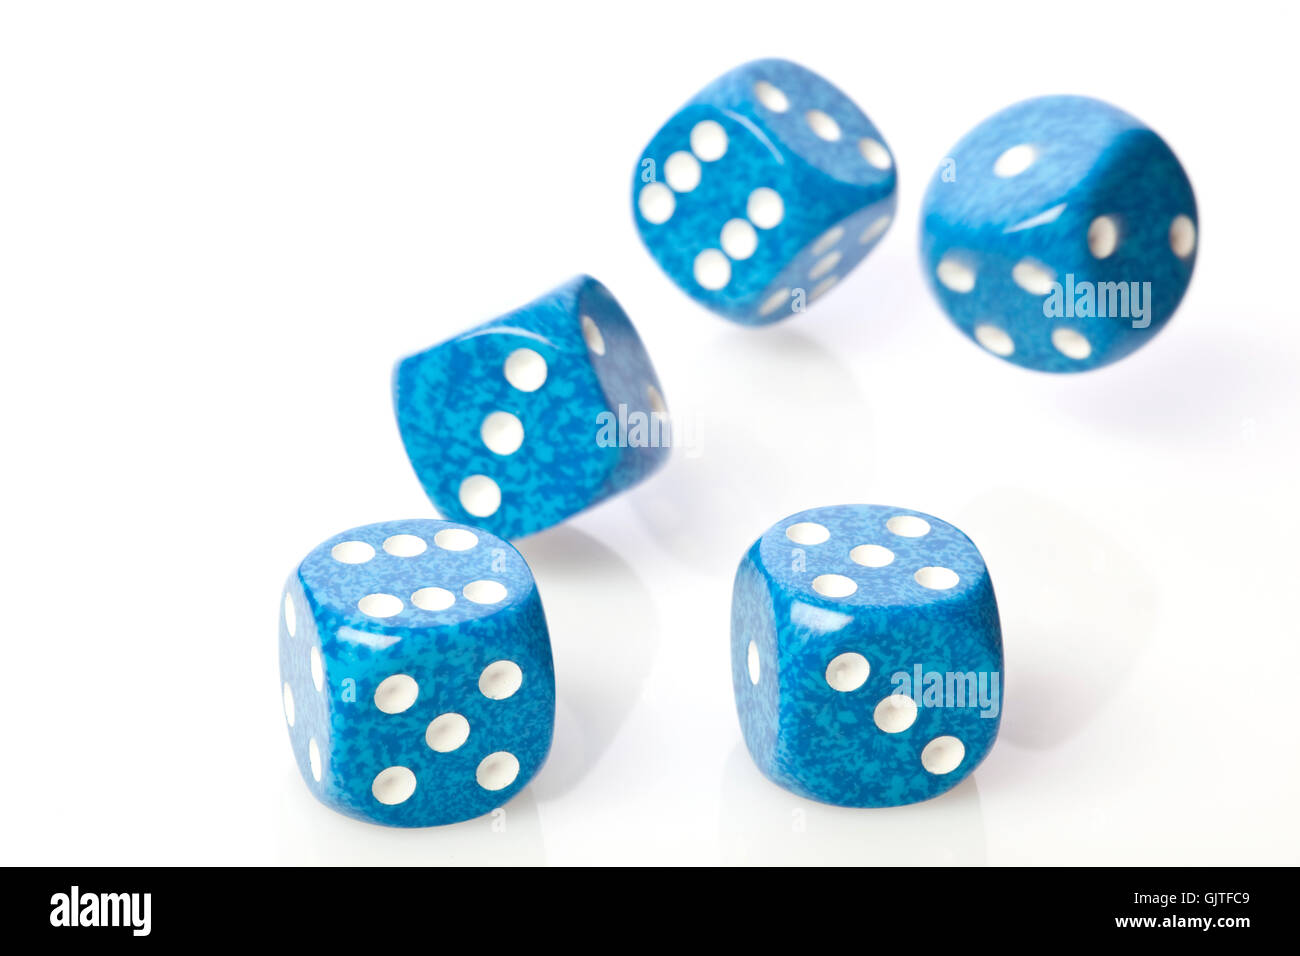 blue games count Stock Photo